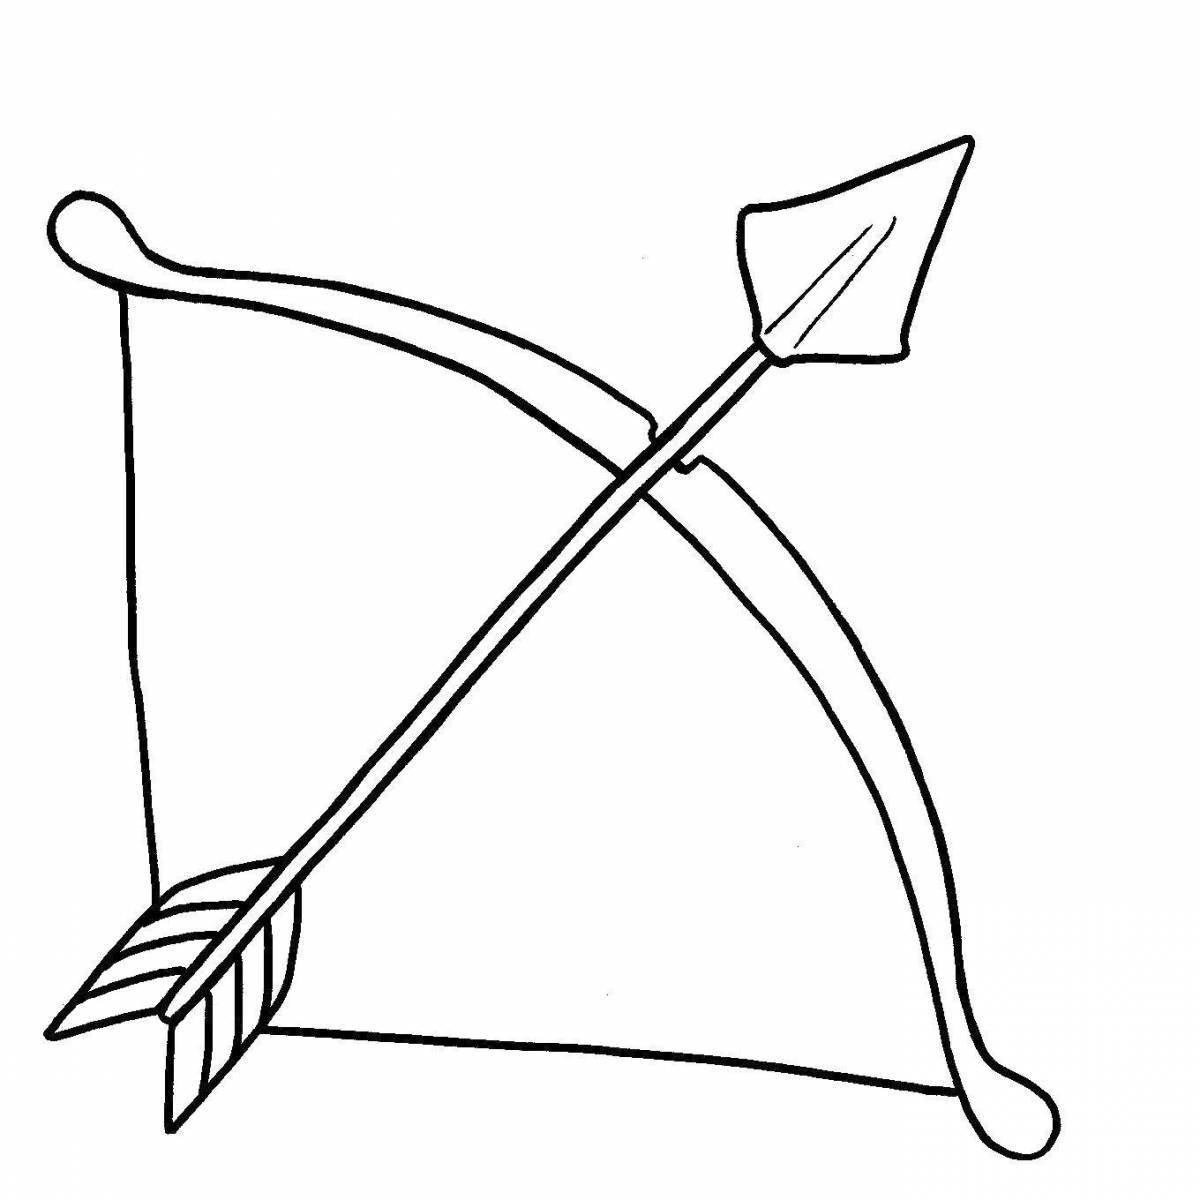 Adorable crossbow coloring page for kids